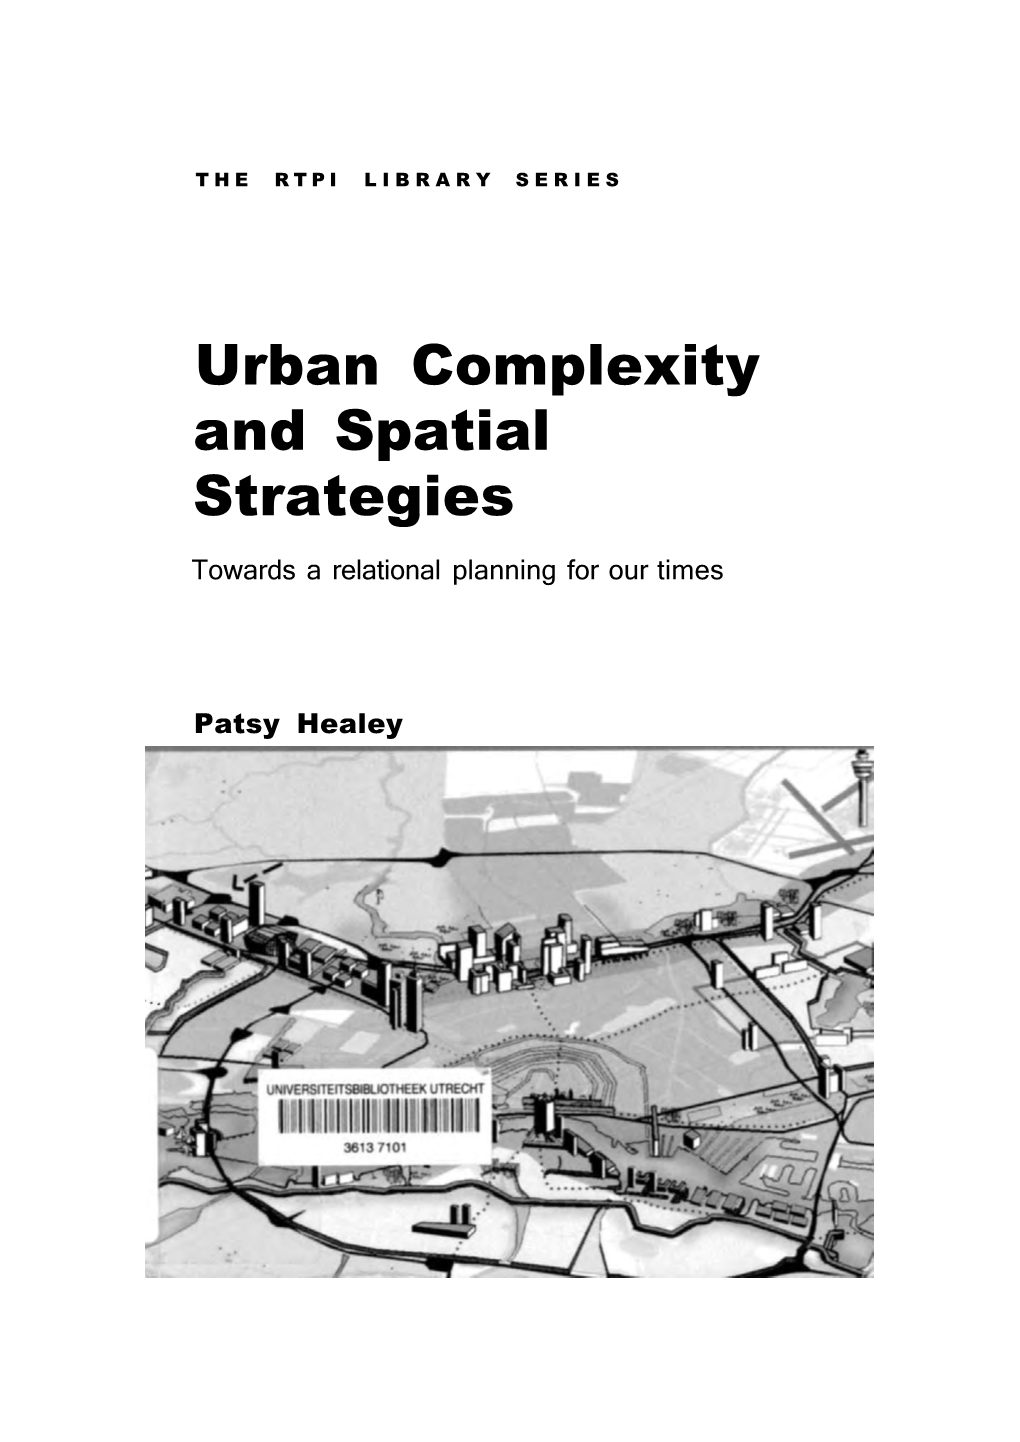 Urban Complexity and Spatial Strategies Towards a Relational Planning for Our Times